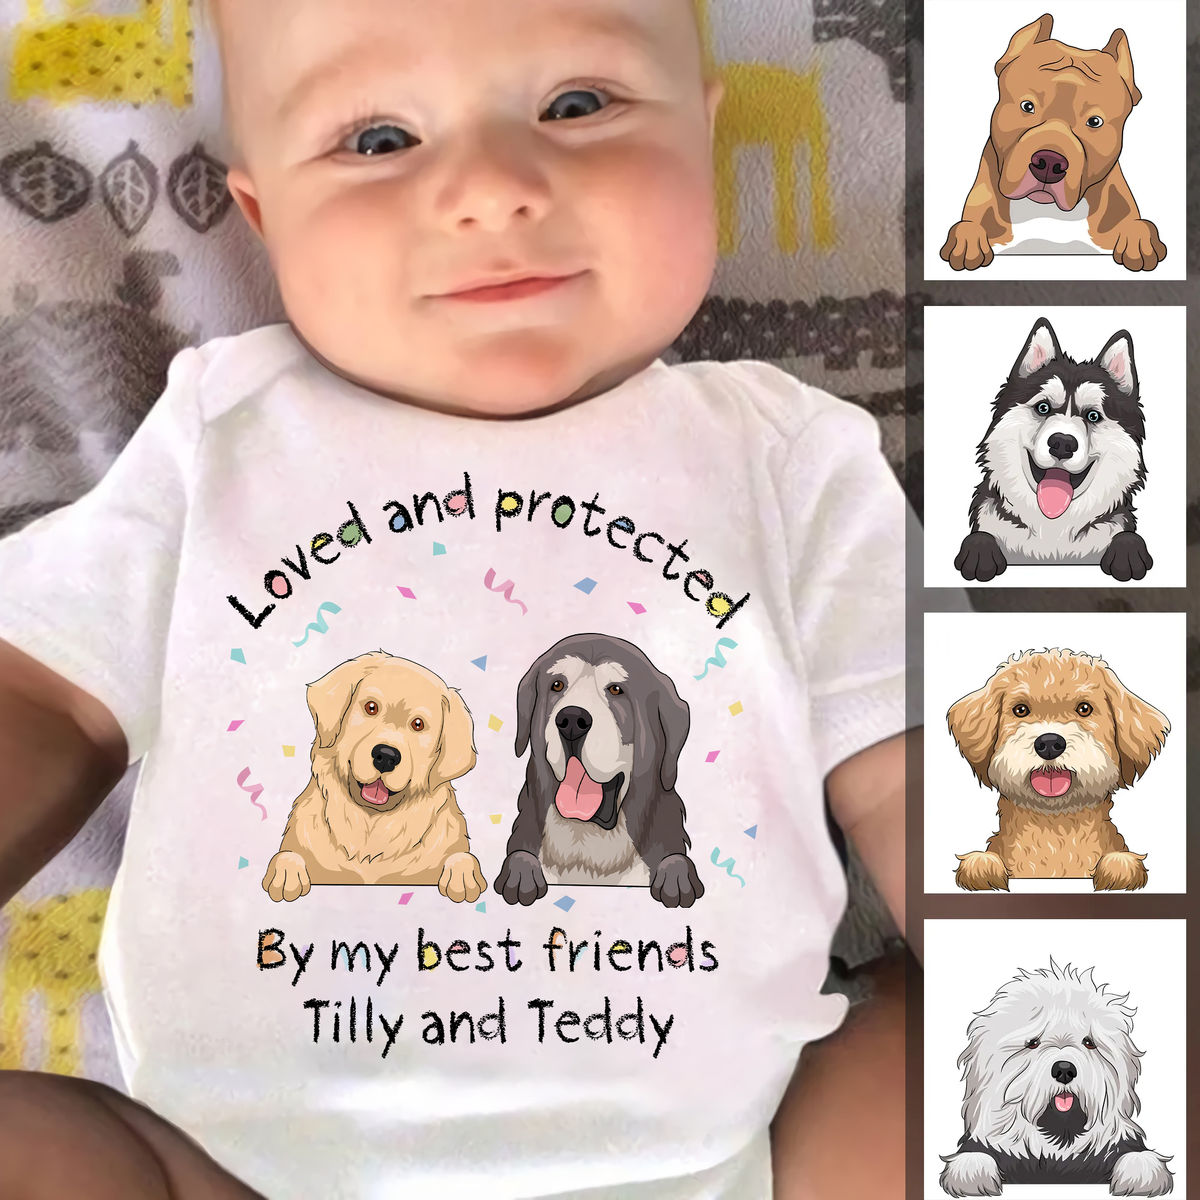 Personalized Shirt - Custom Baby Onesies - Loved and Protected By my best friends